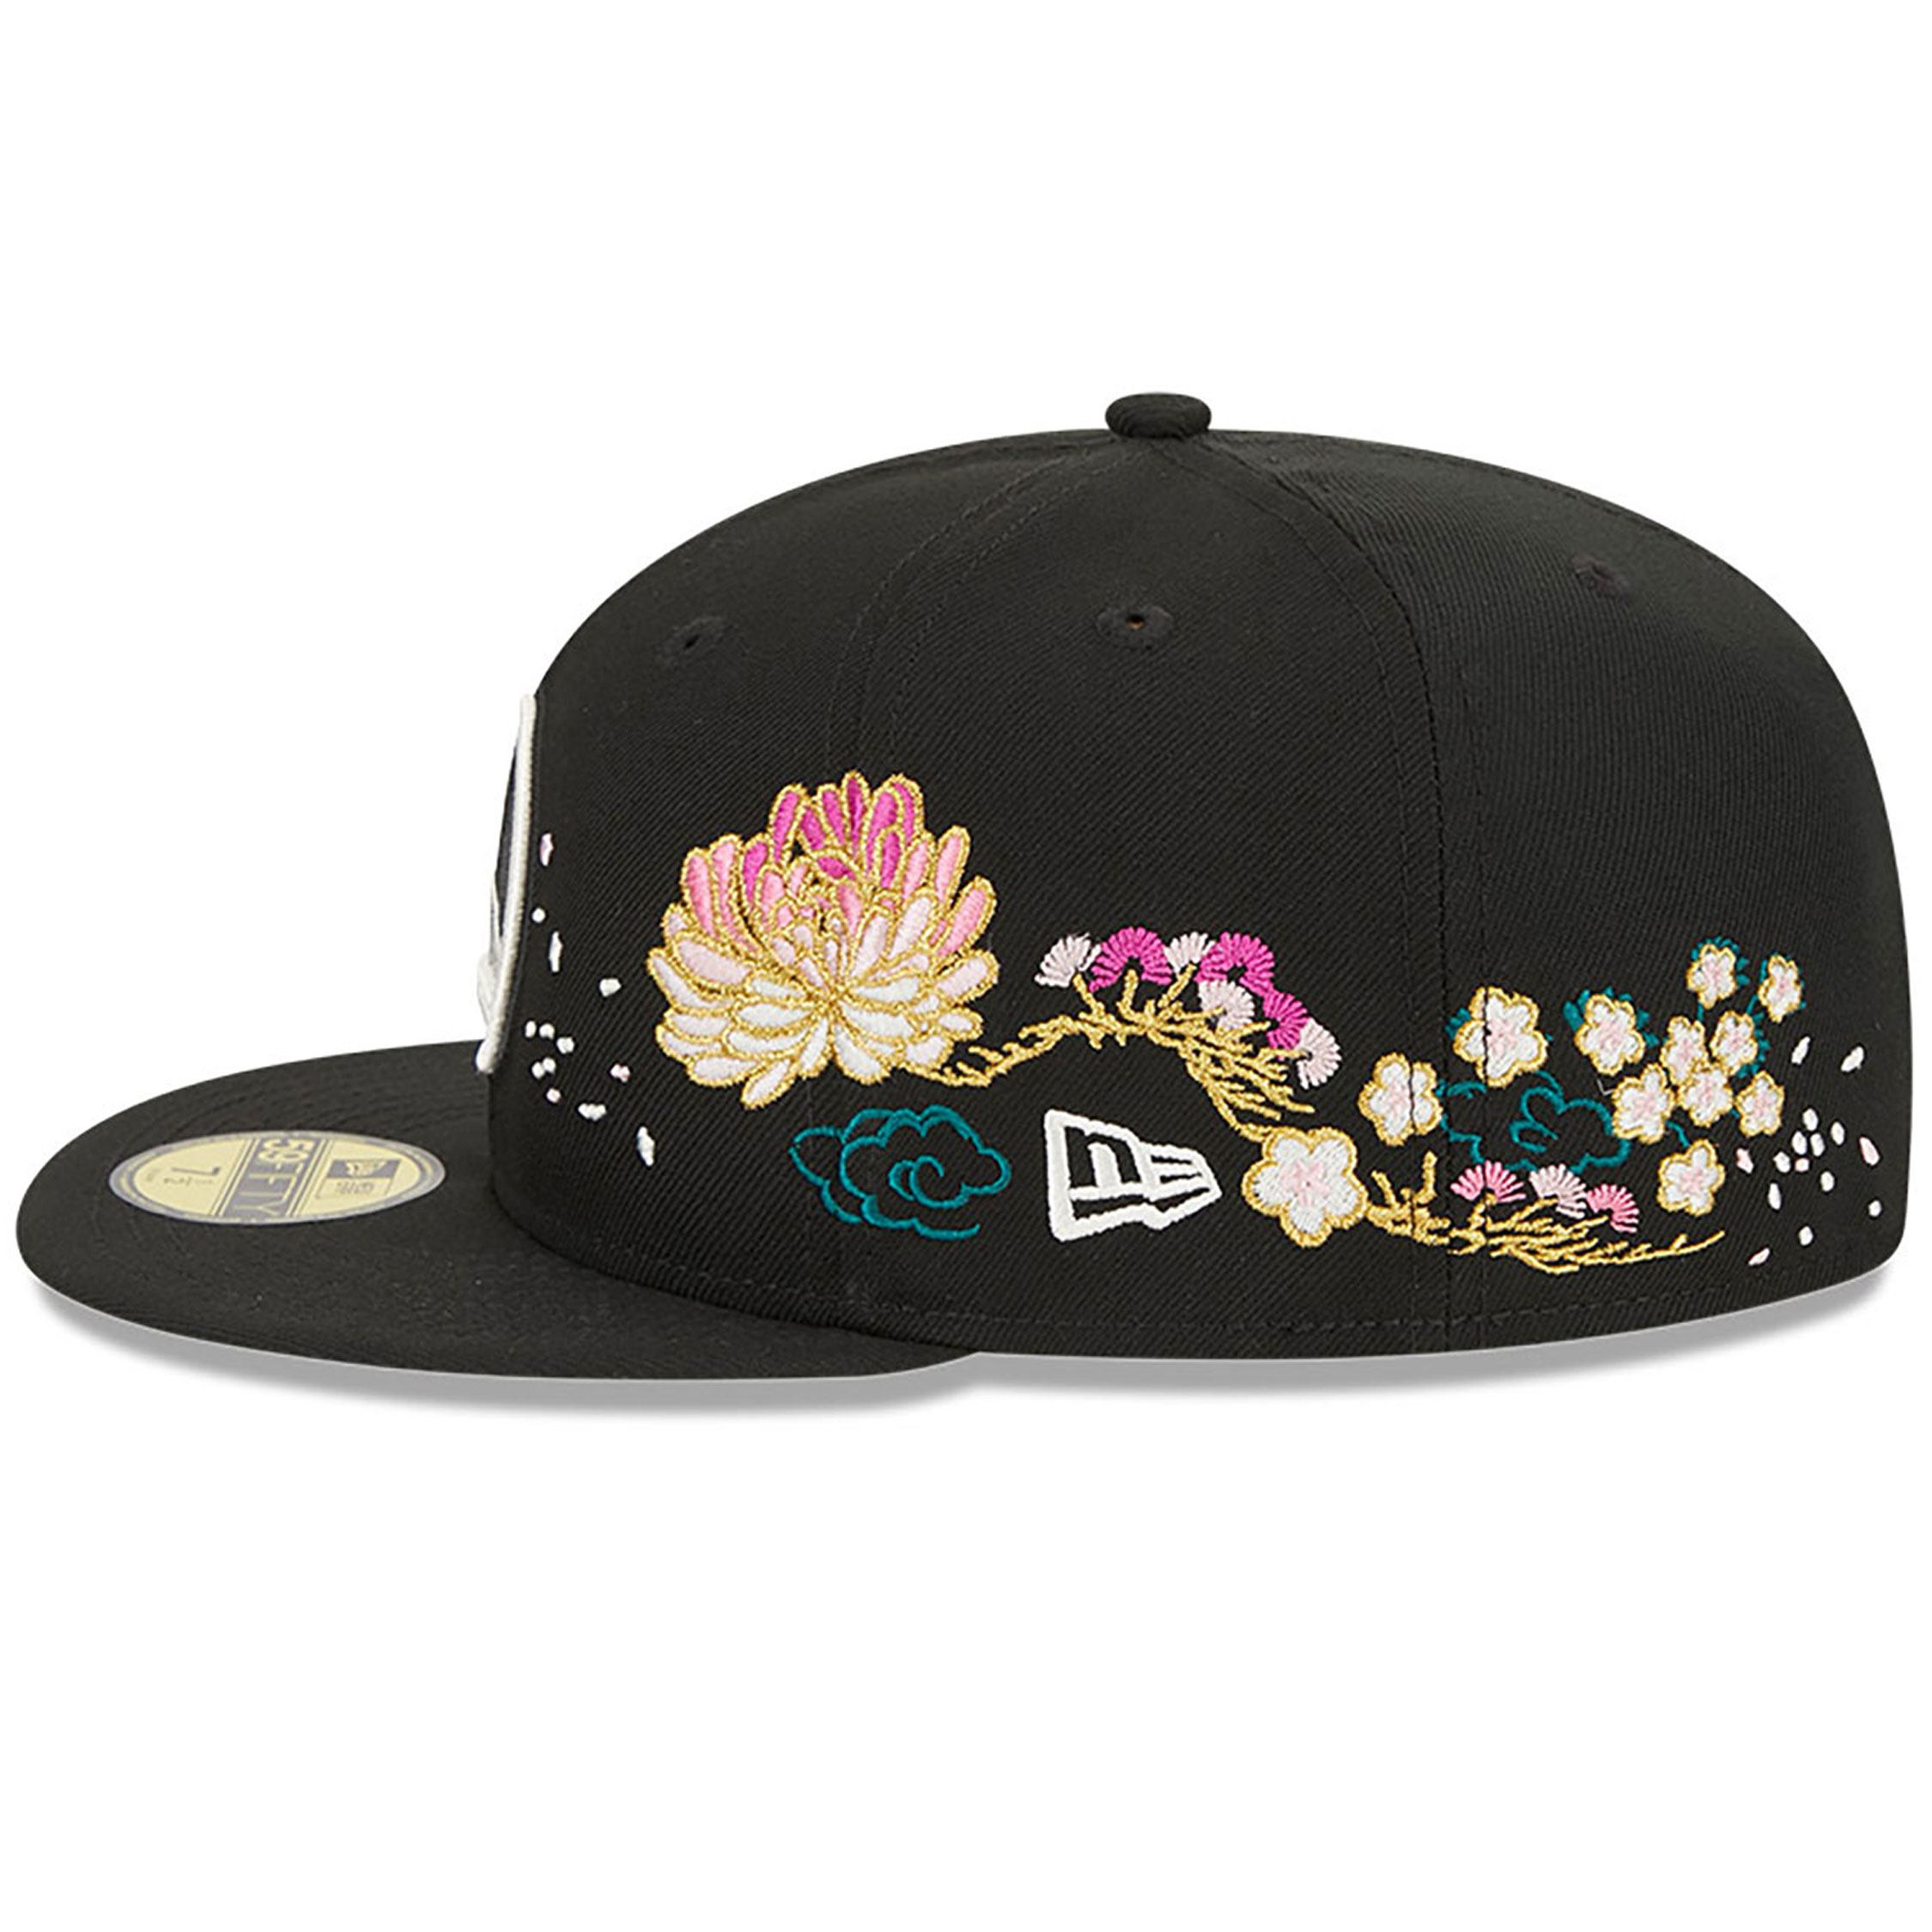 Golden State Warriors Cherry Blossom Black 59FIFTY Fitted Cap